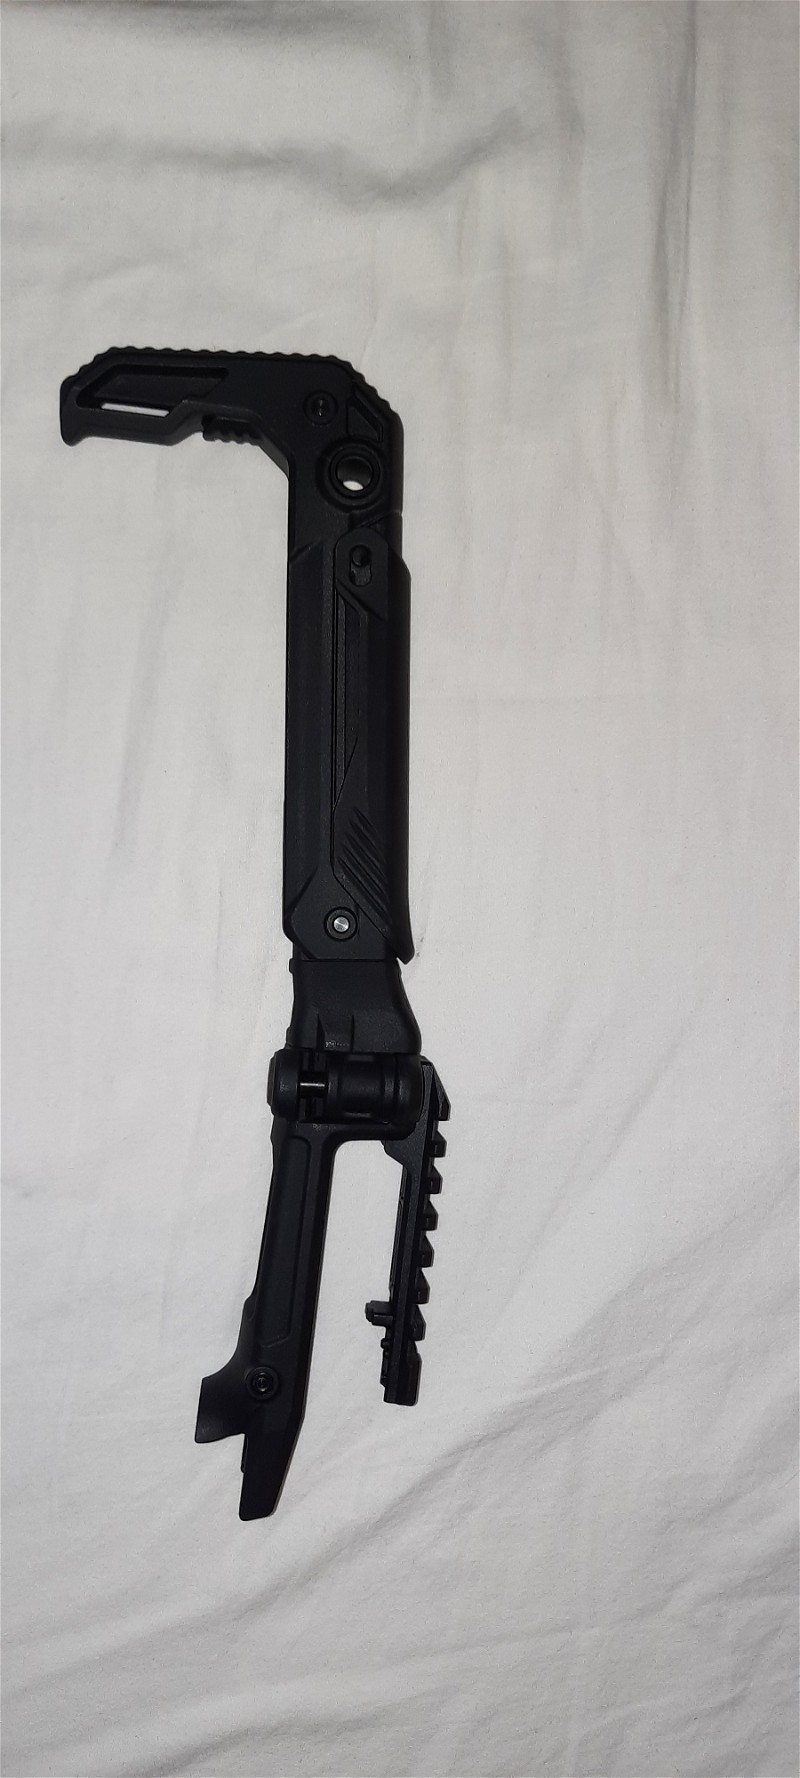 Image 1 for AAP-01 Folding Stock